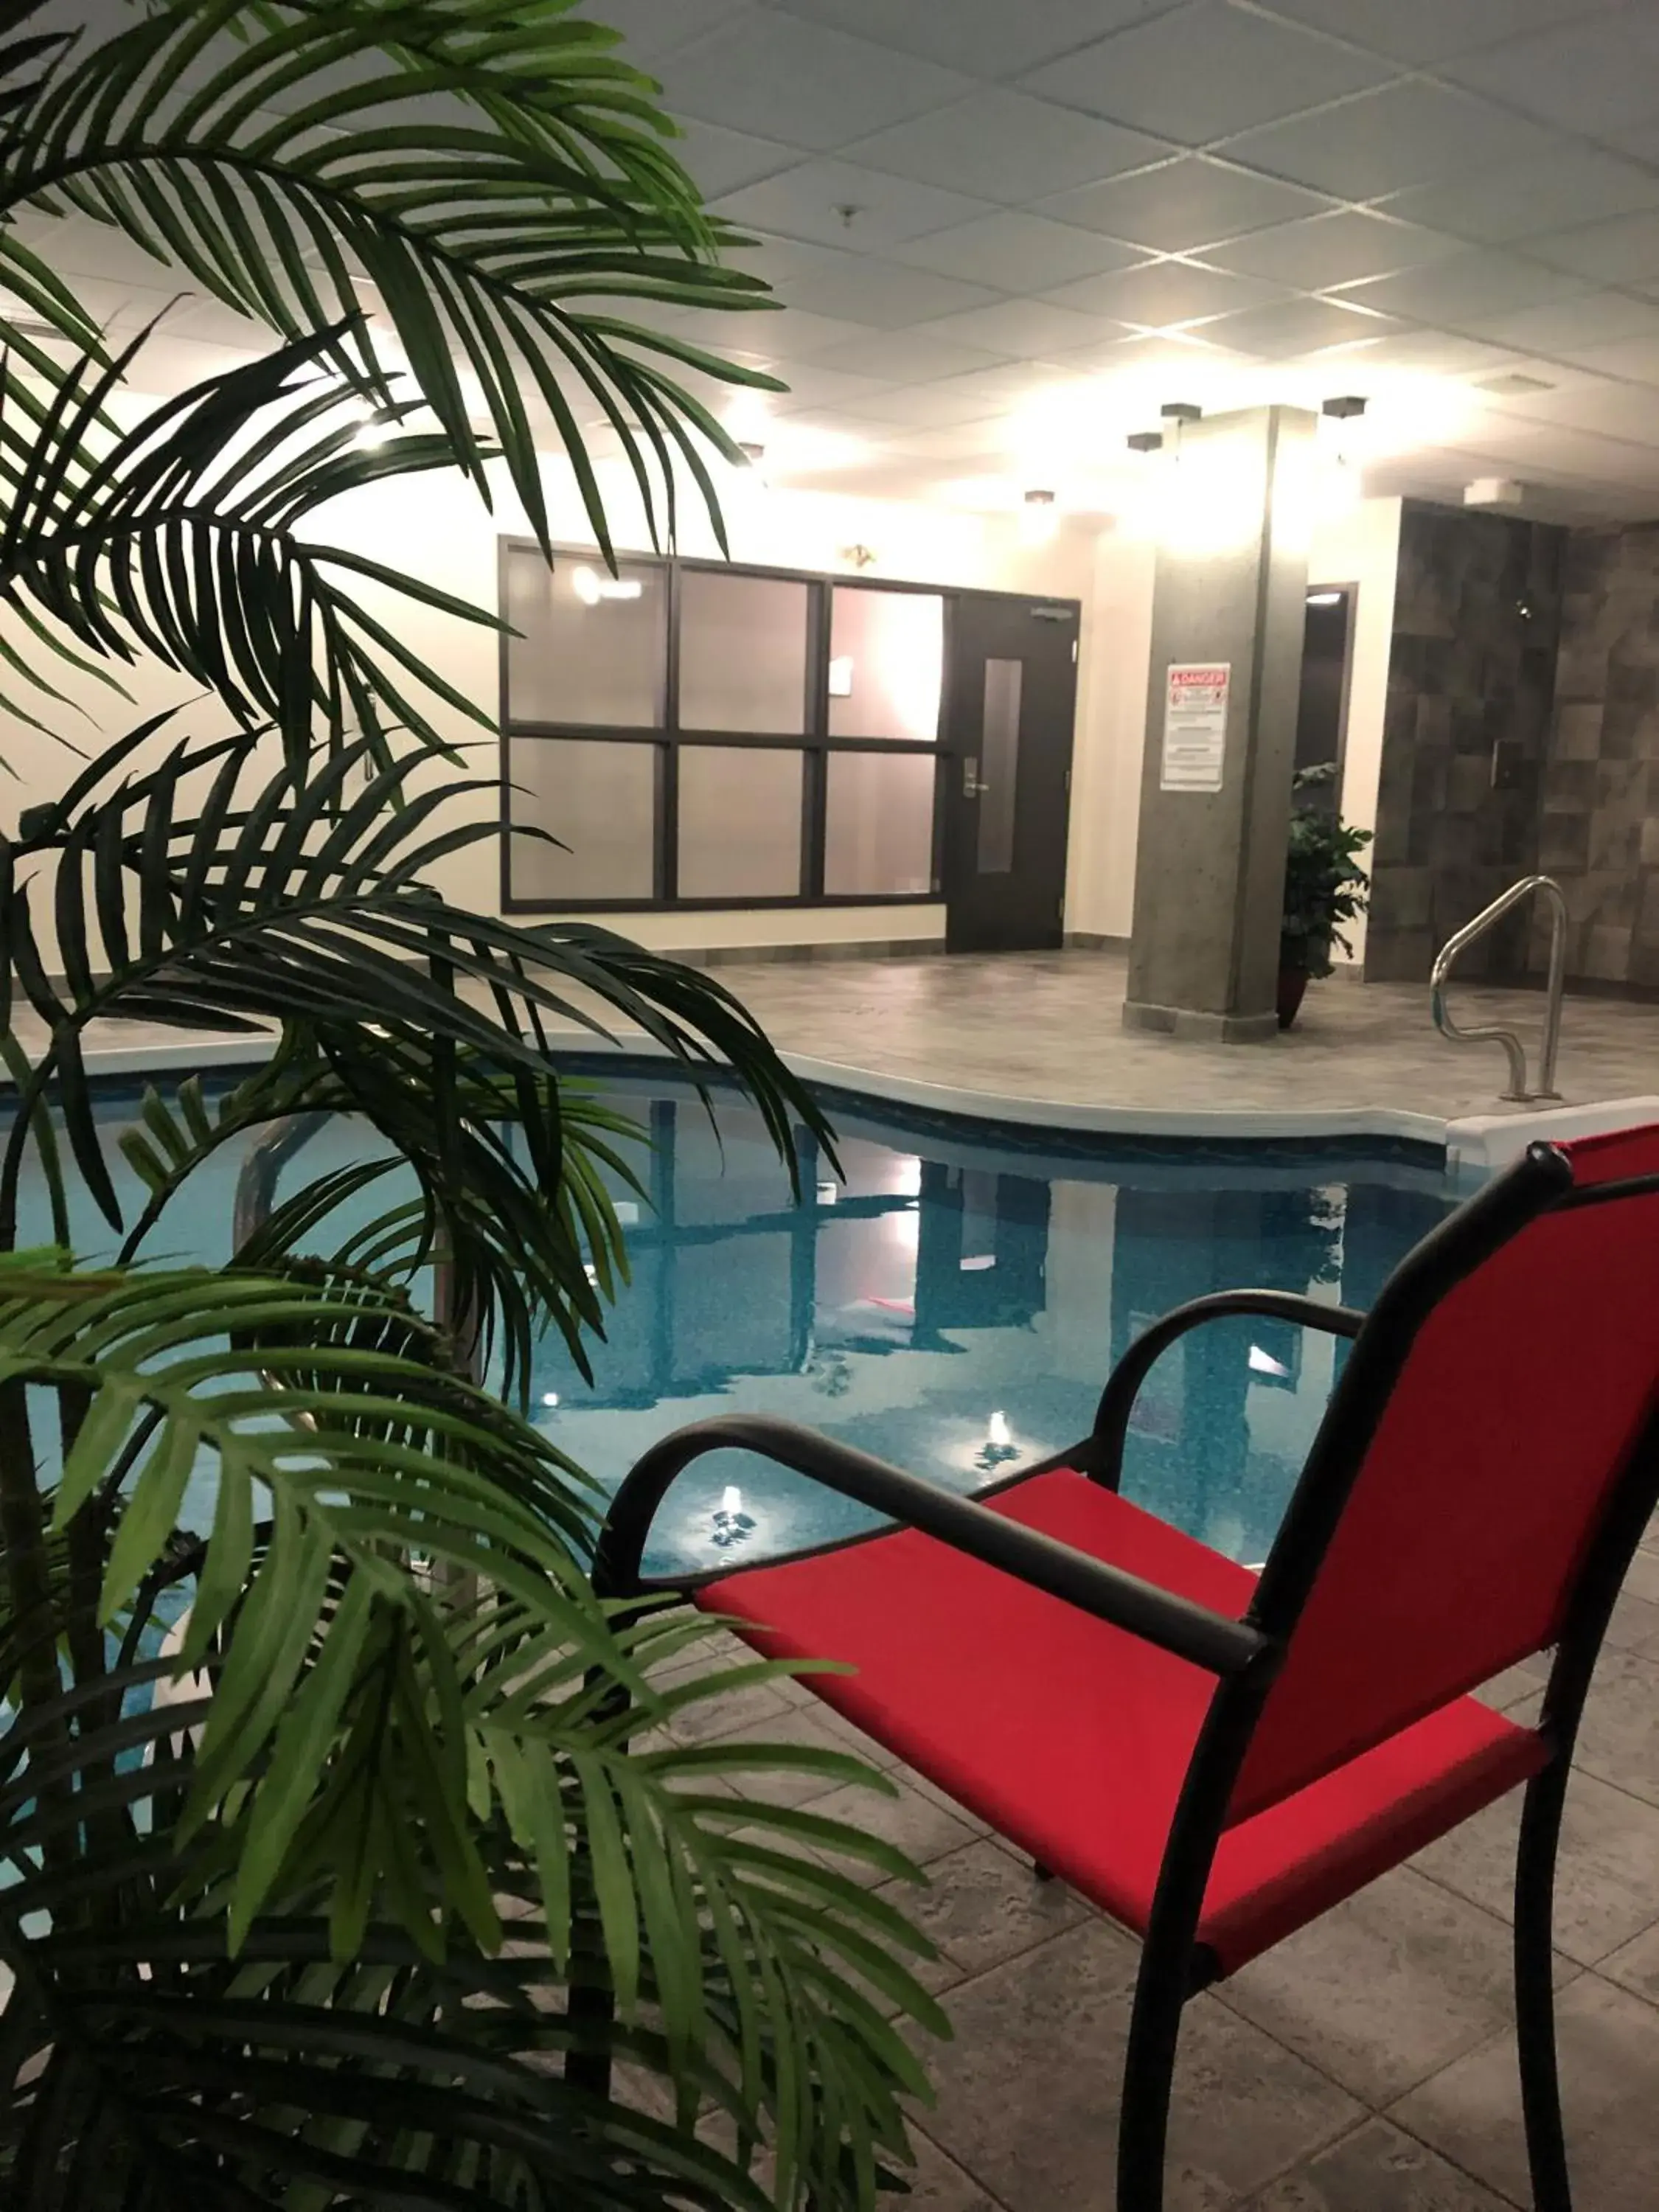 Swimming Pool in Grand Times Hotel - Aeroport de Quebec